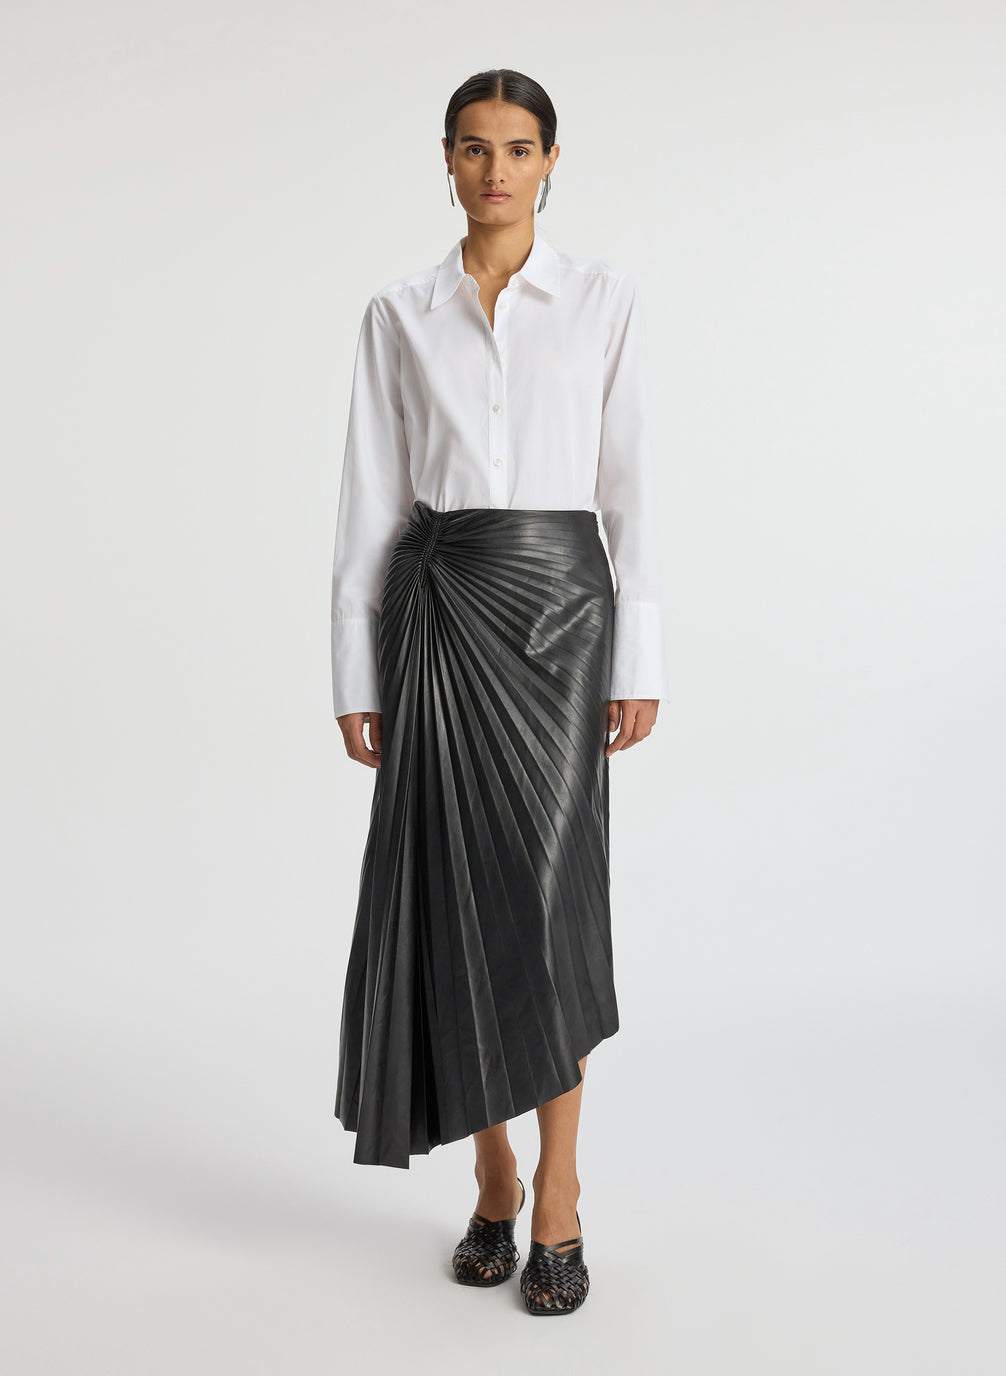 front view of woman wearing white button down top and black pleated vegan leather skirt